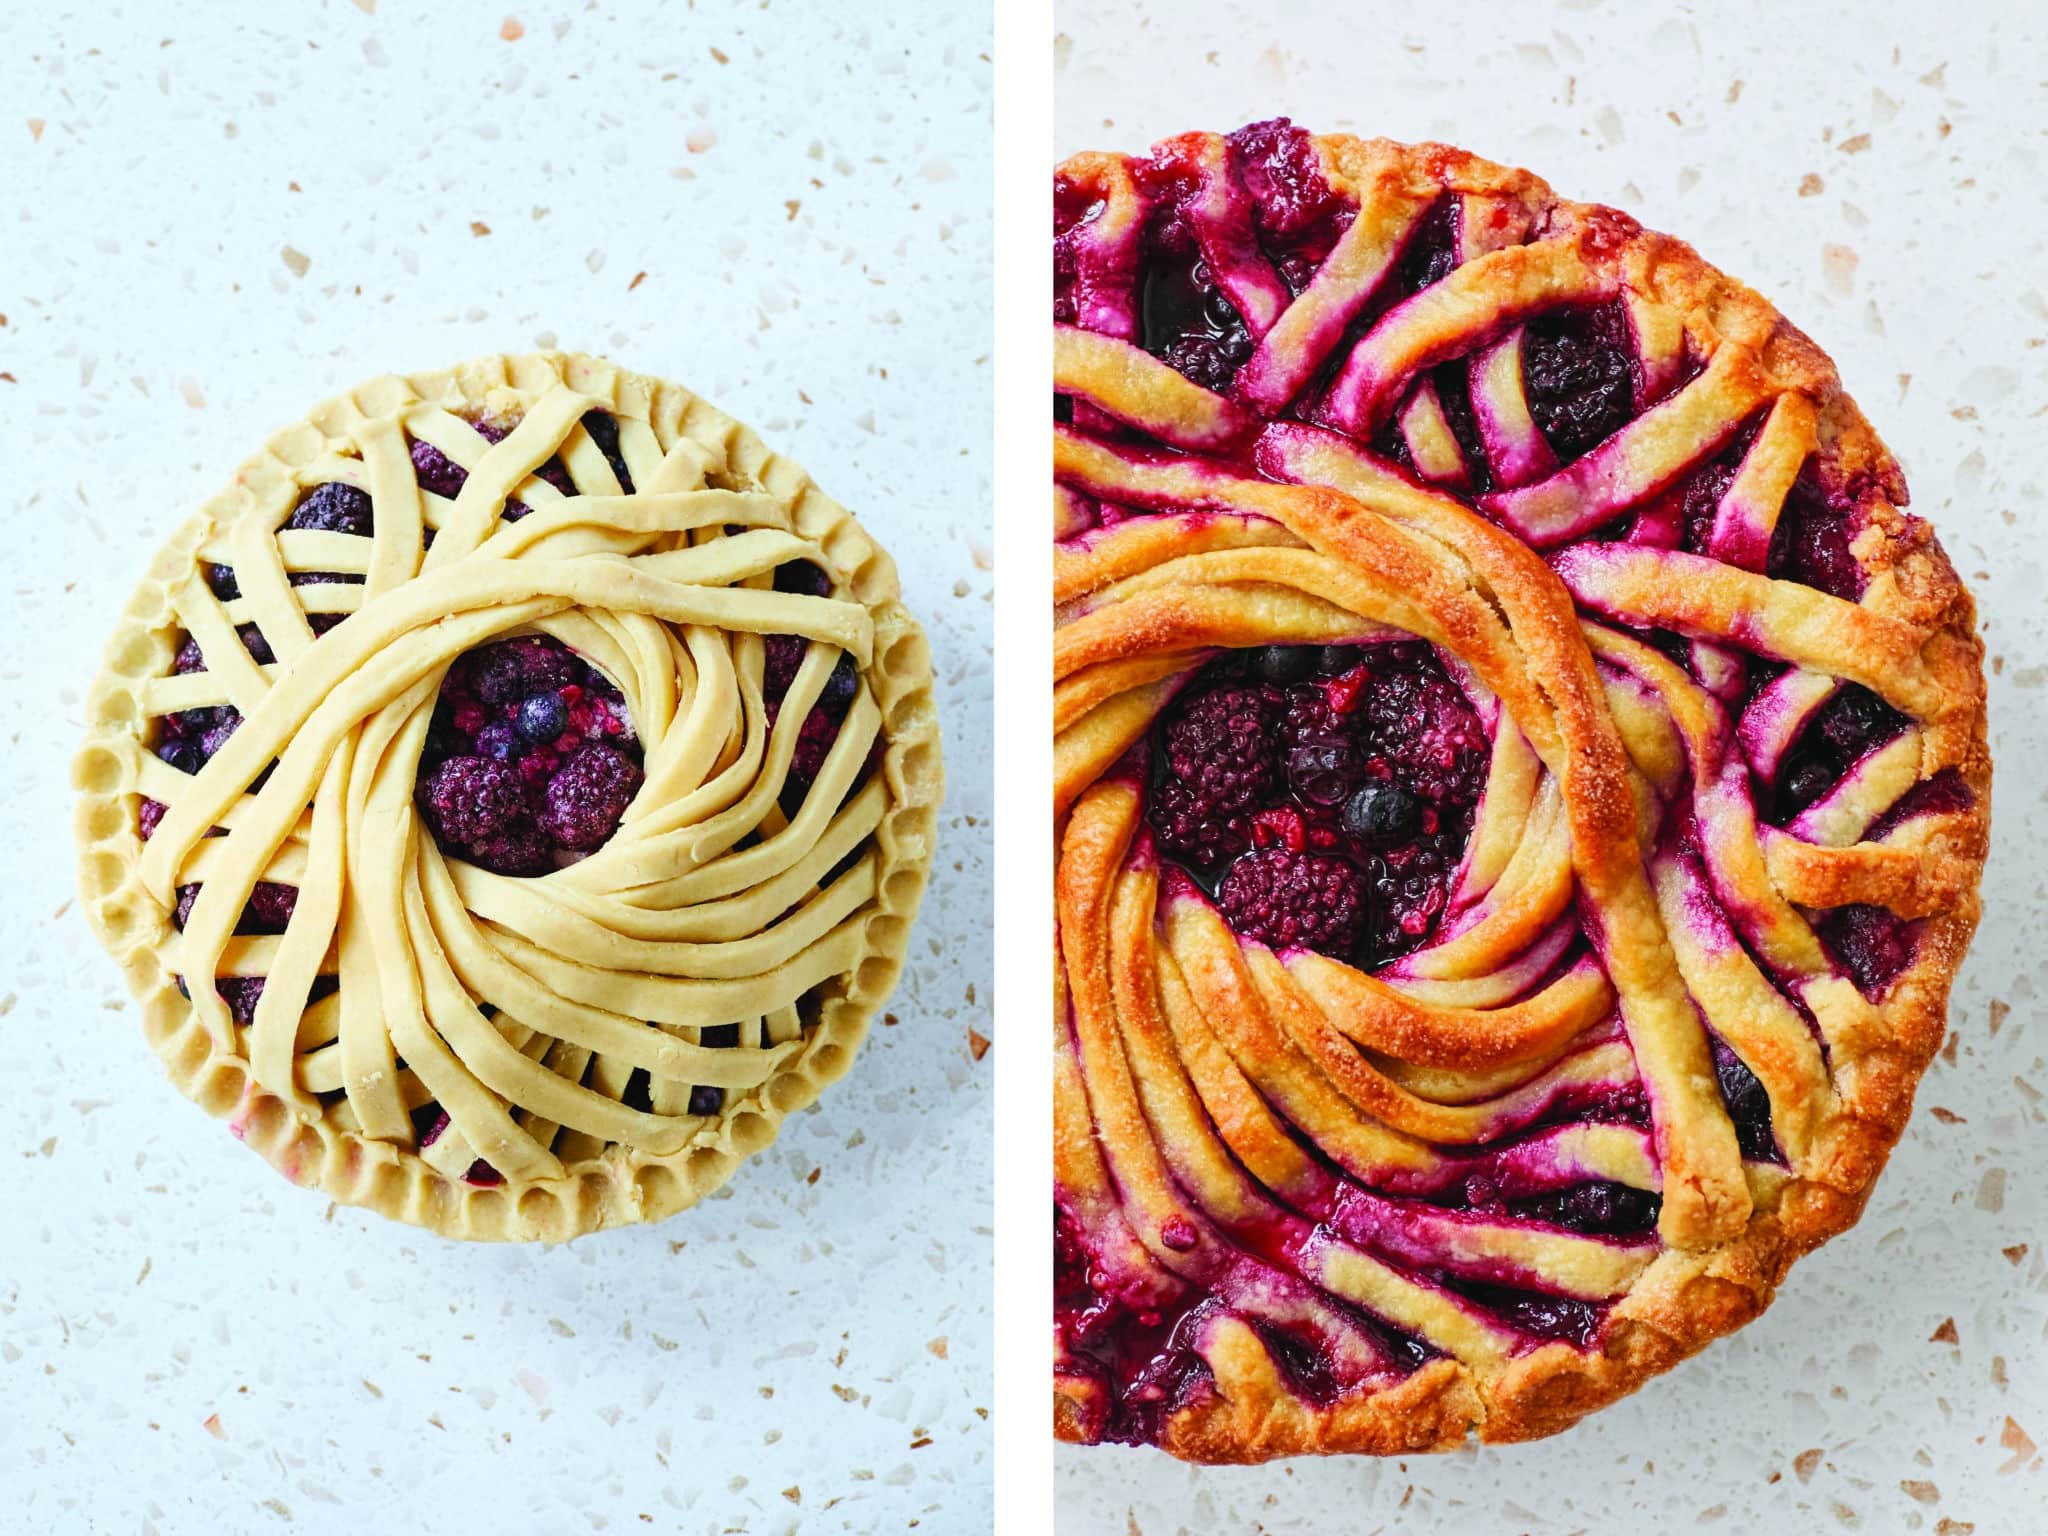 Before and after baking a pie with geometric designs.